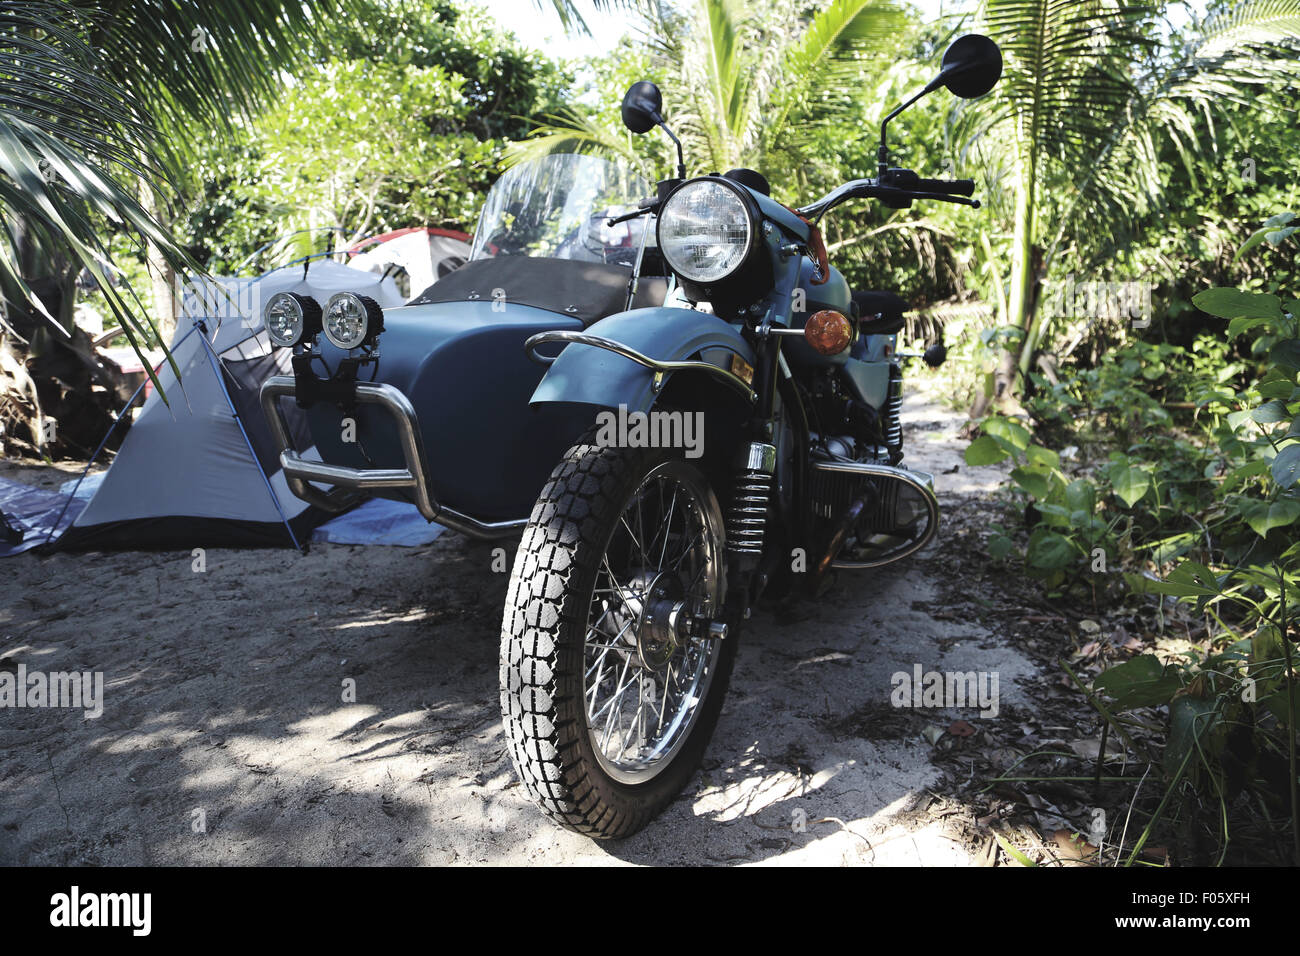 An IMZ Ural motorcycle with side car goes camping off road, on a beach amongst sand, palm trees, and tents. Stock Photo